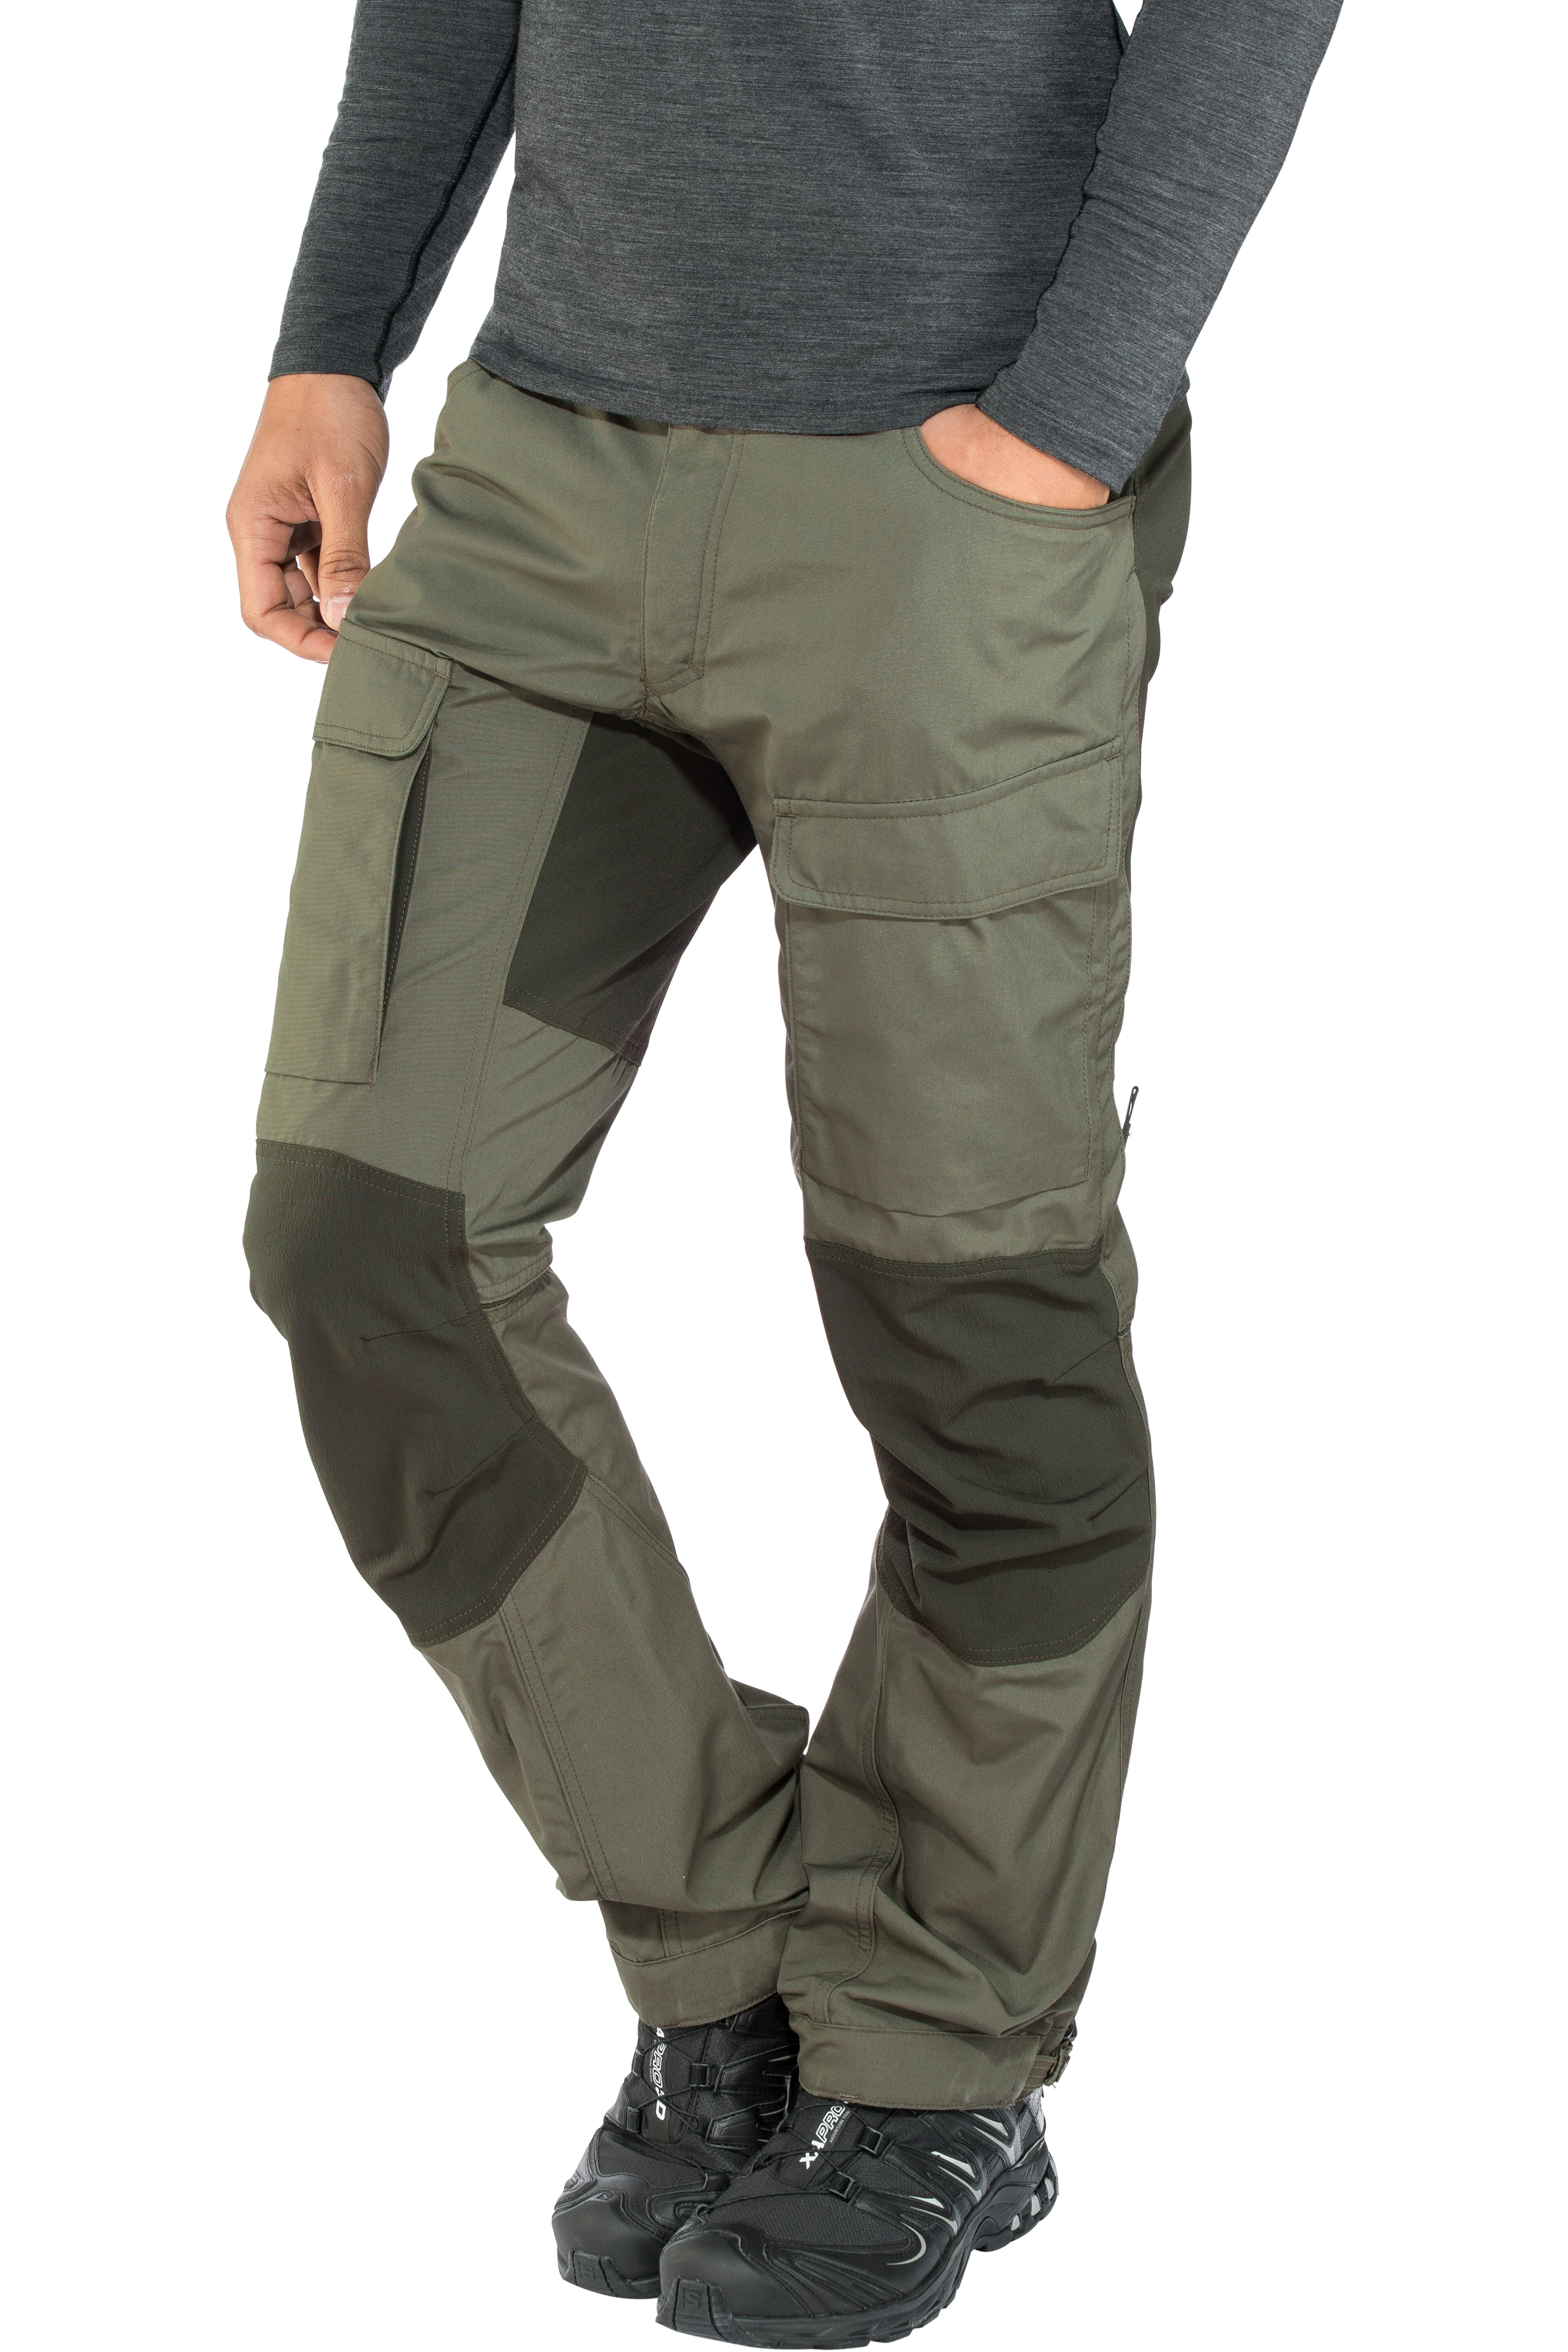 Lundhags Authentic II Pants Men regular olive at Addnature.co.uk